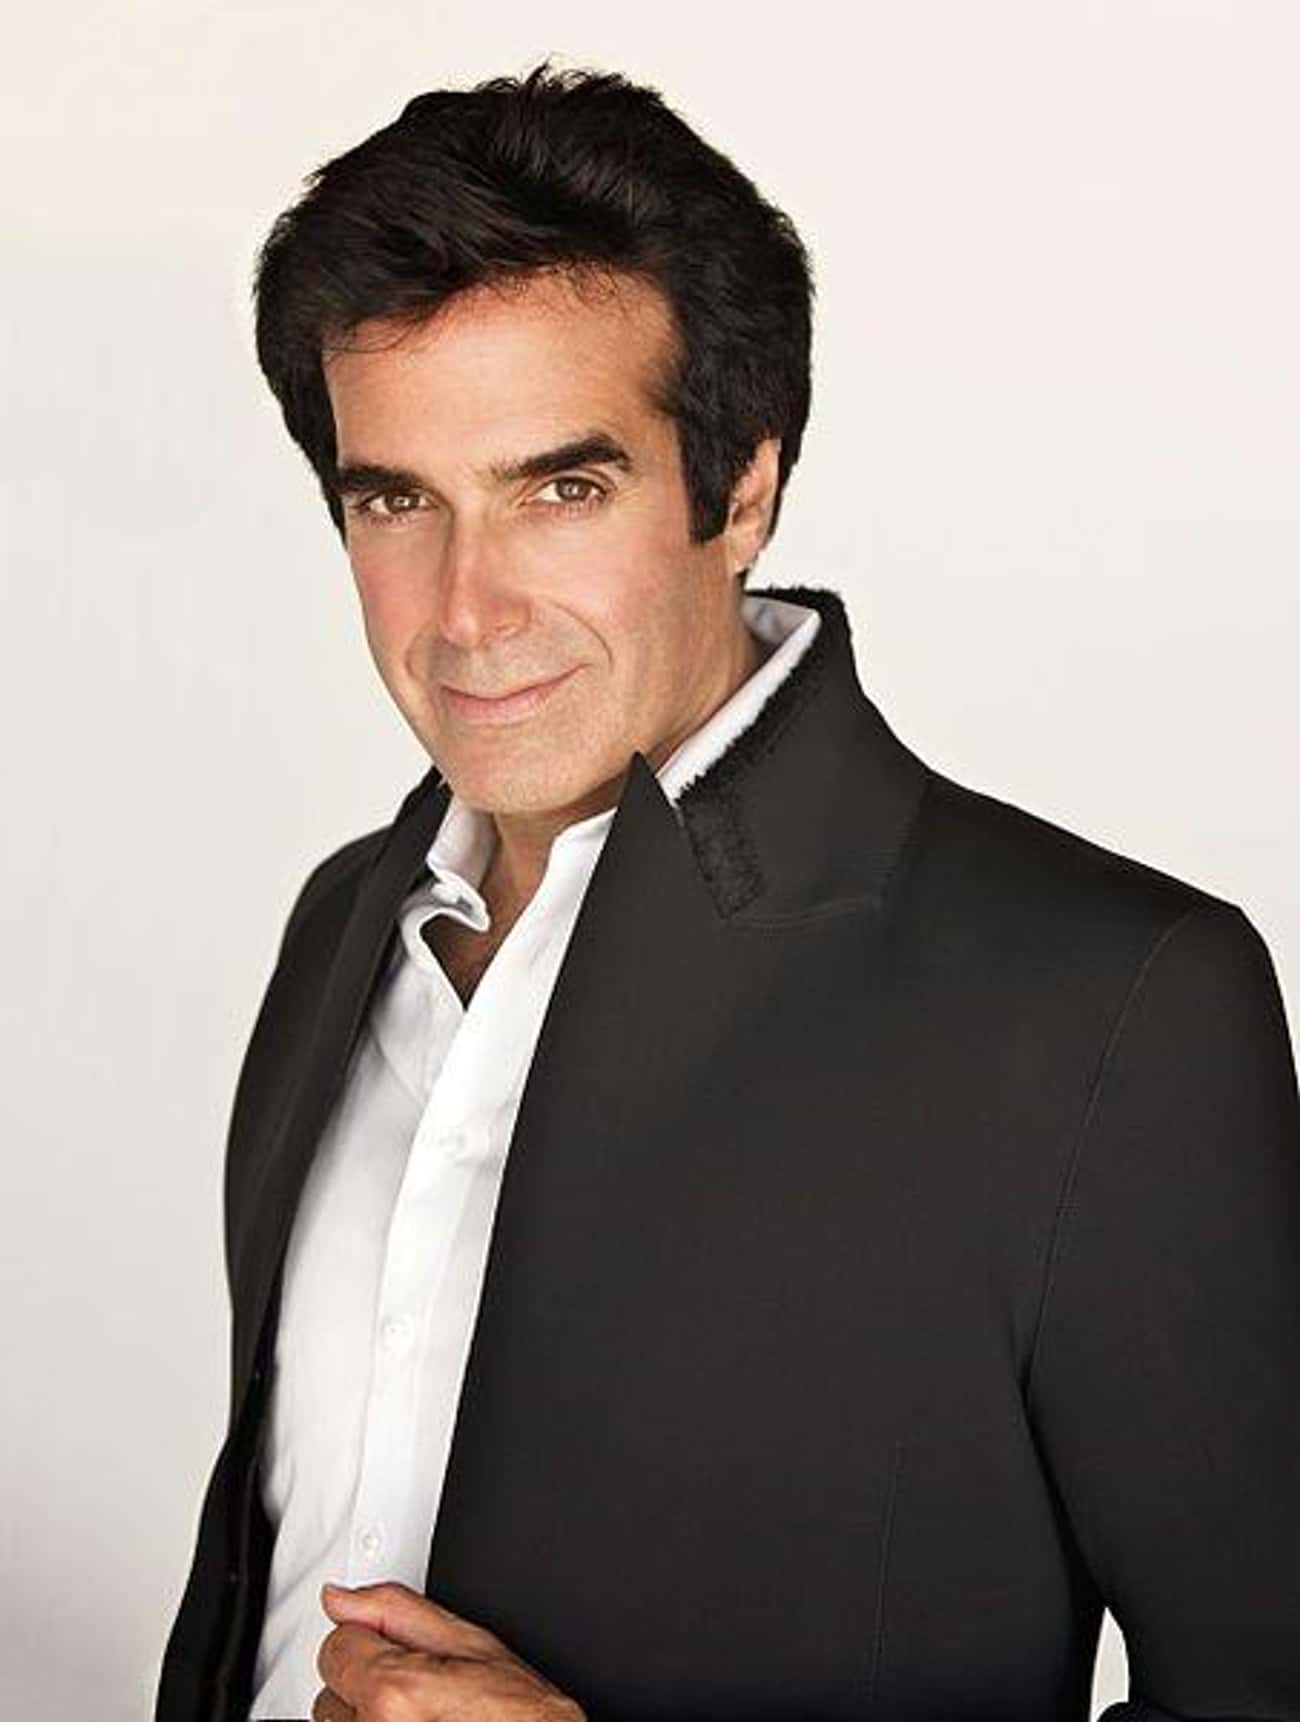 David Copperfield's 'Lucky 13' Trick